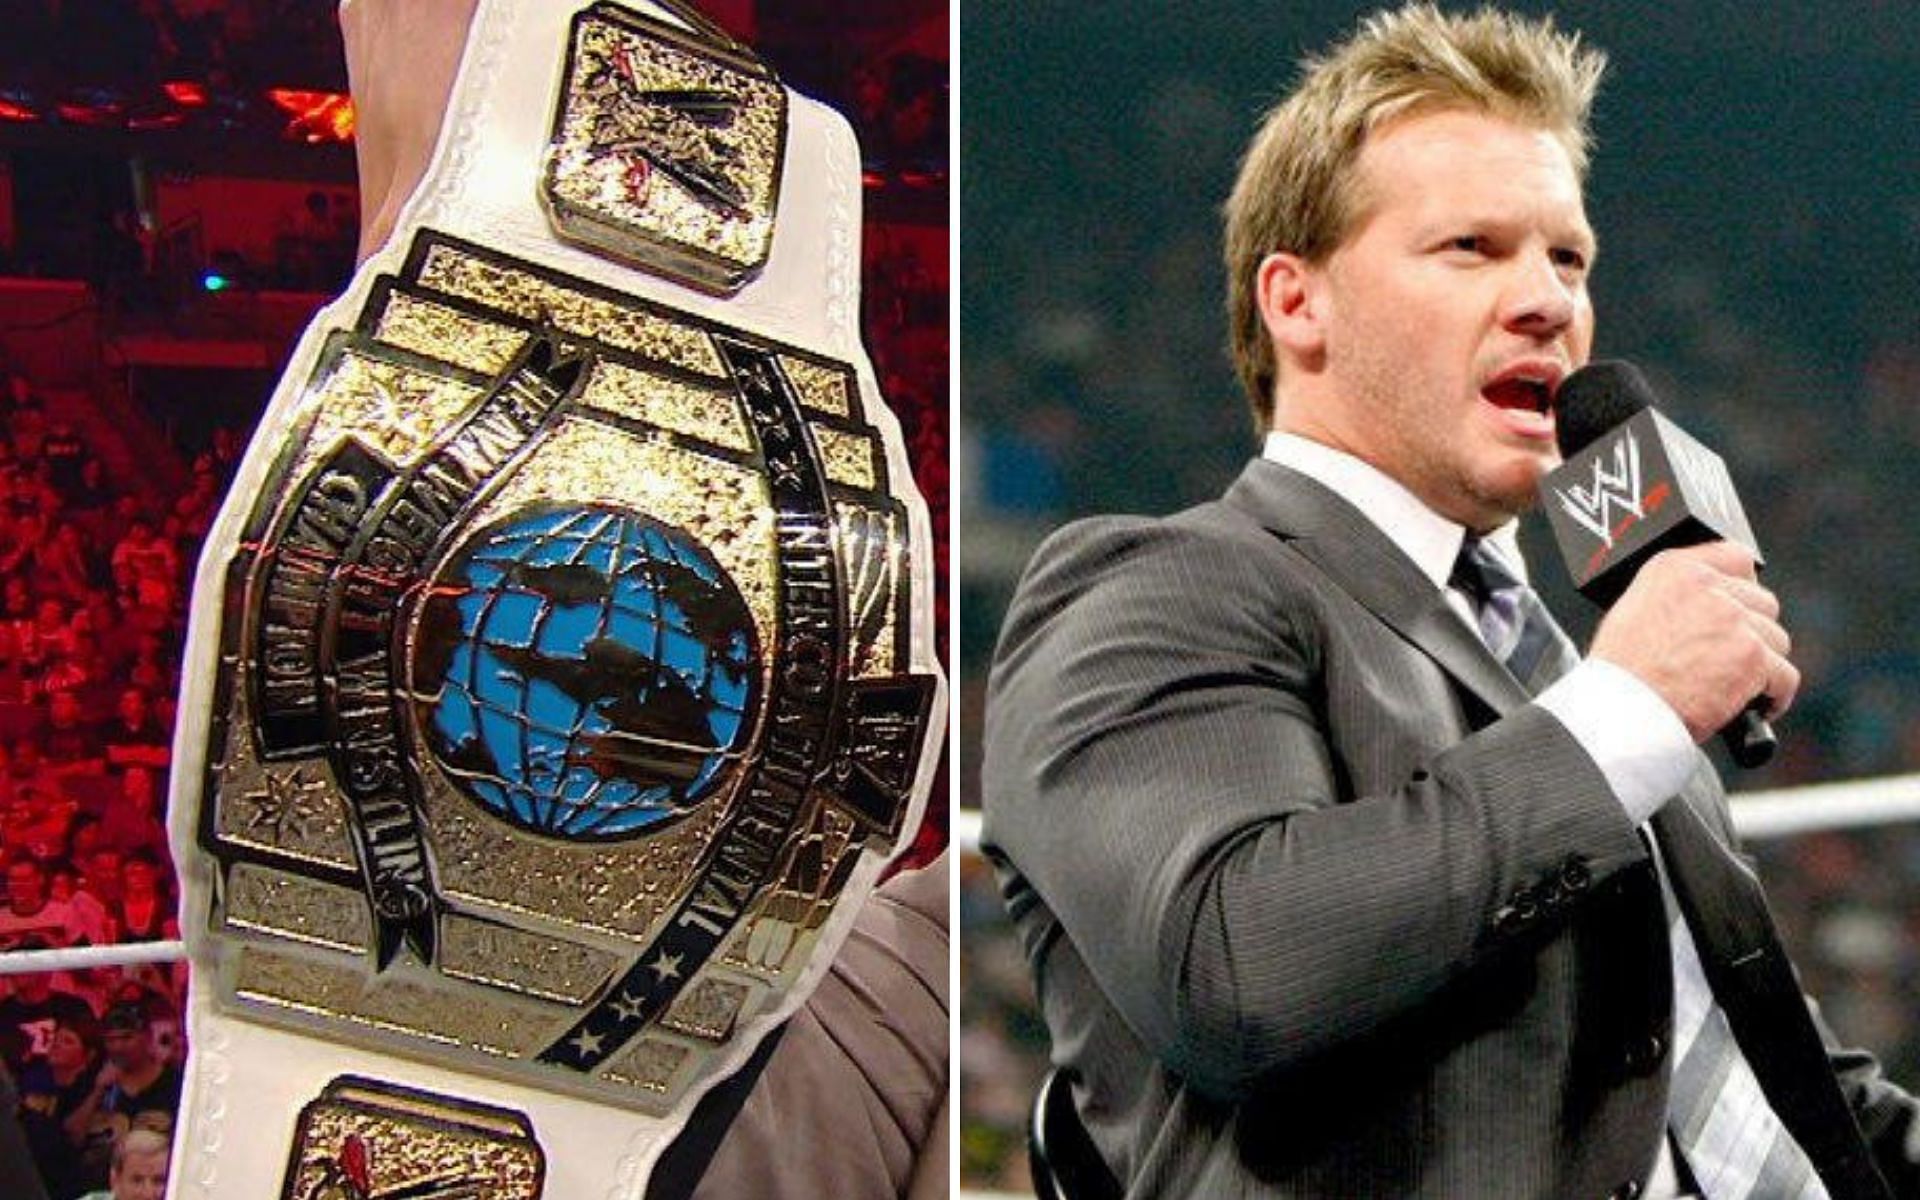 Chris Jericho is a 9-time Intercontinental Champion!